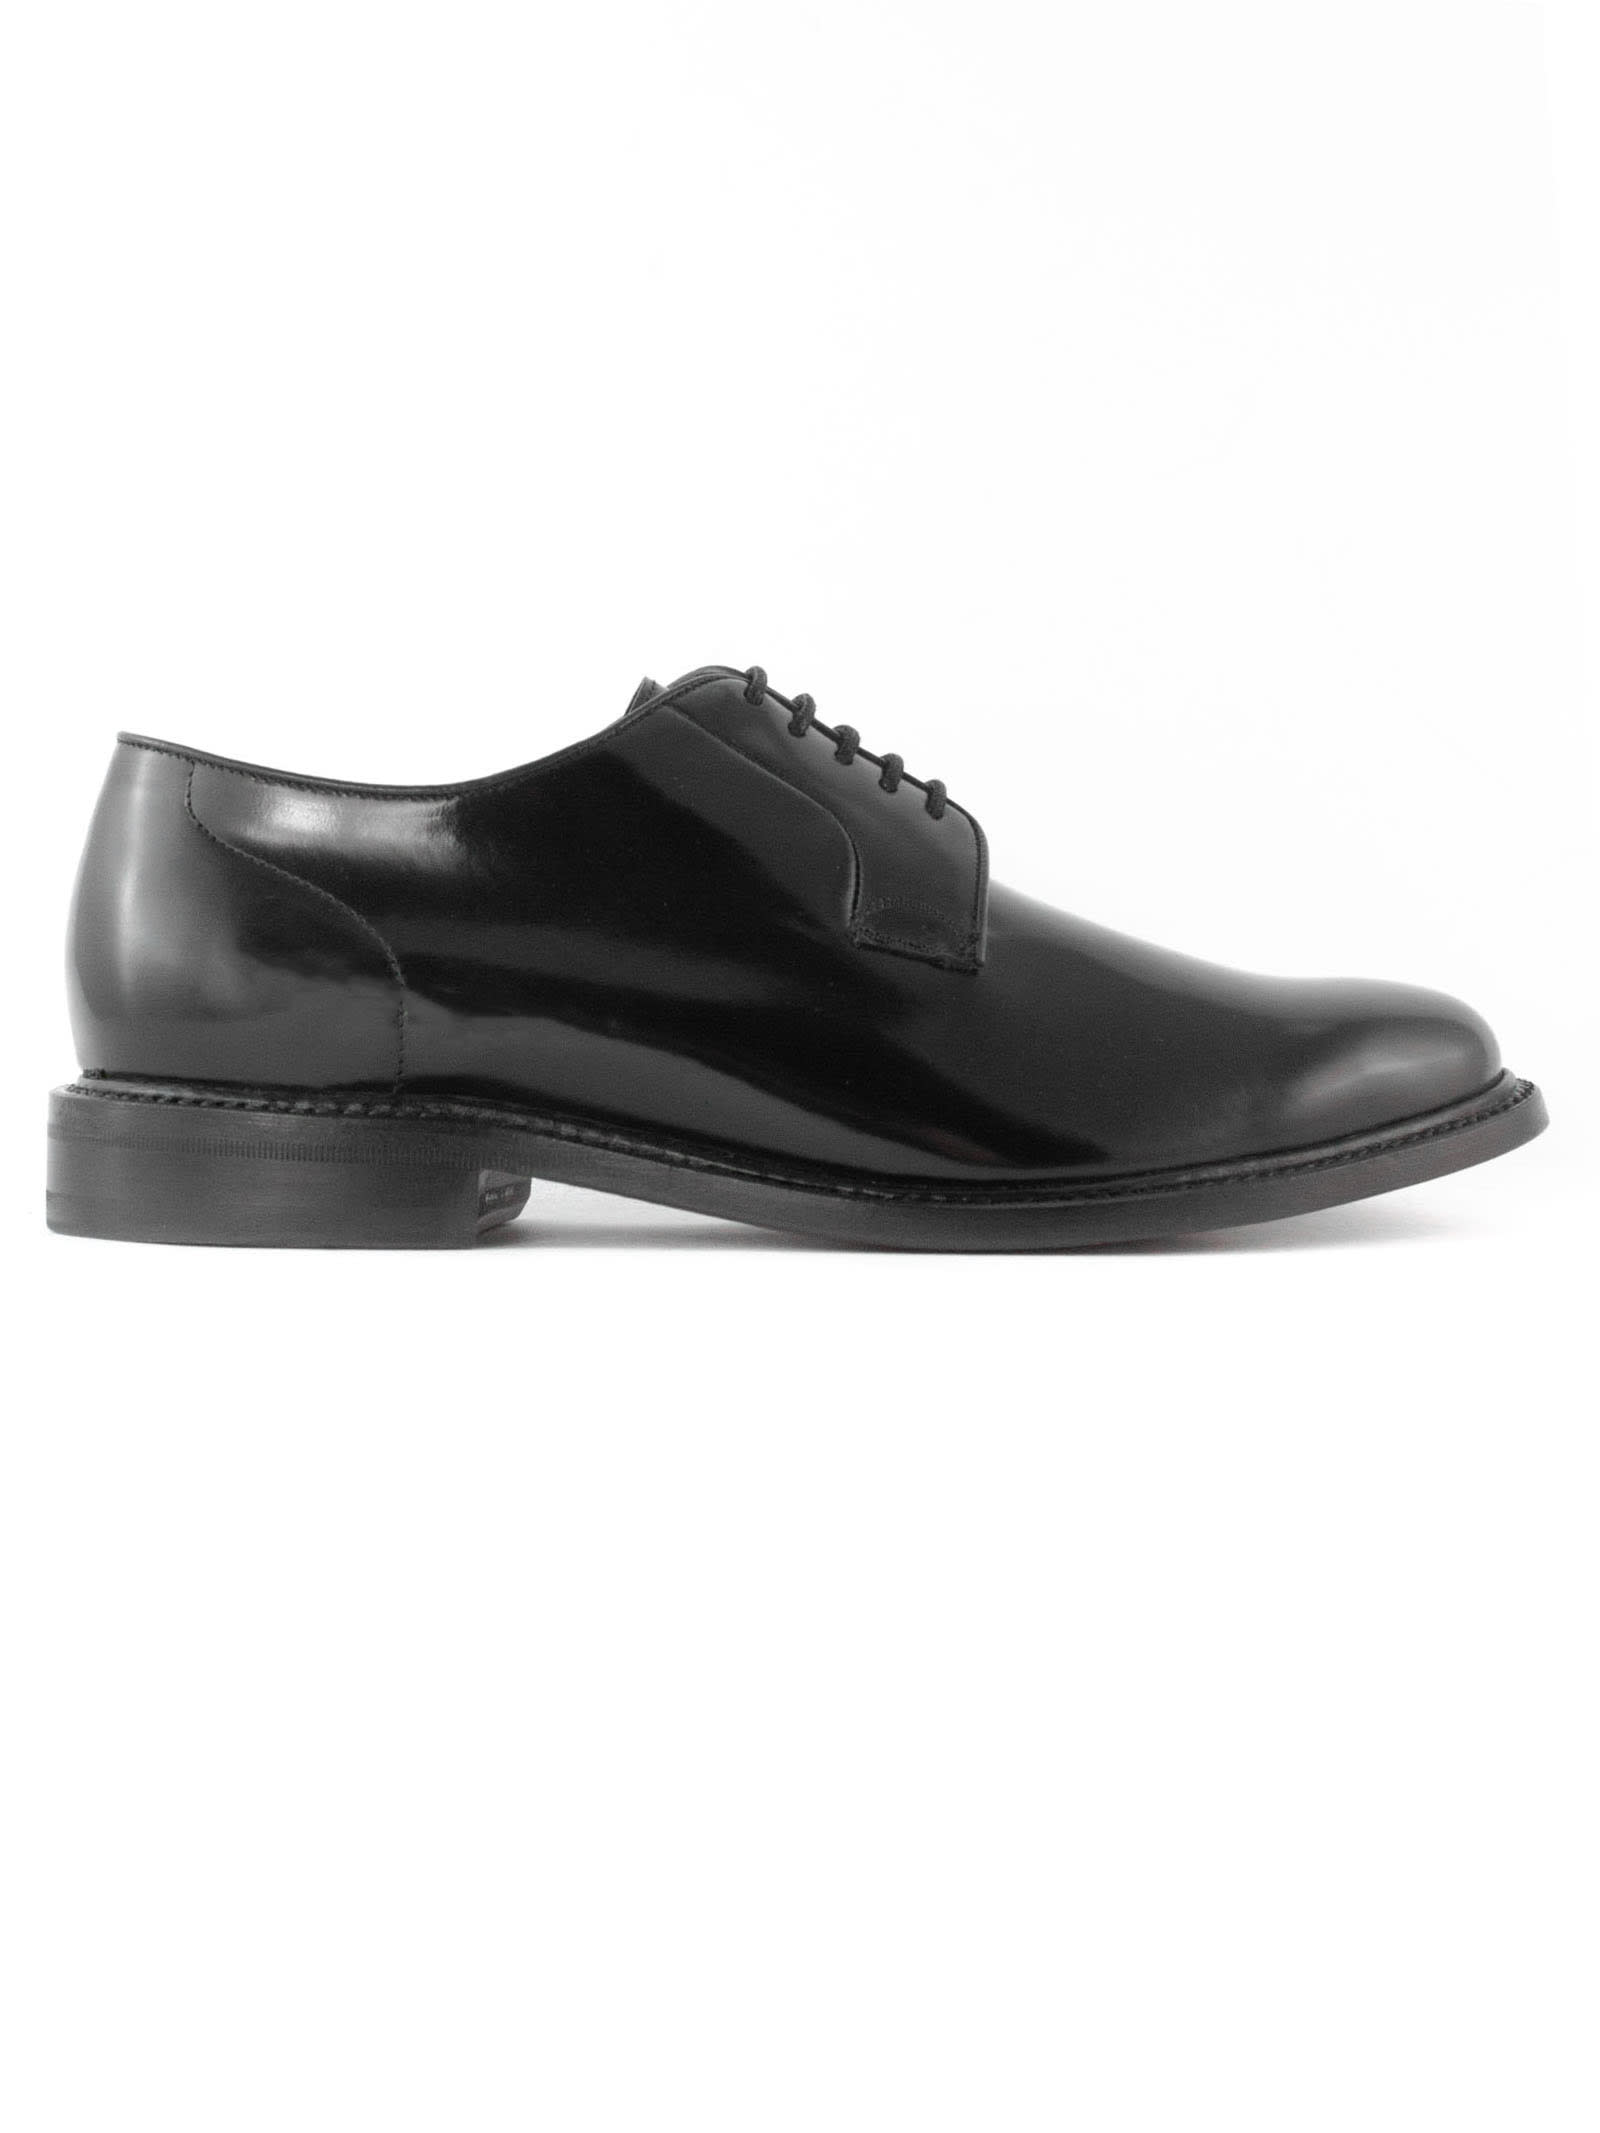 1707 Black Patent Leather Derby Shoes